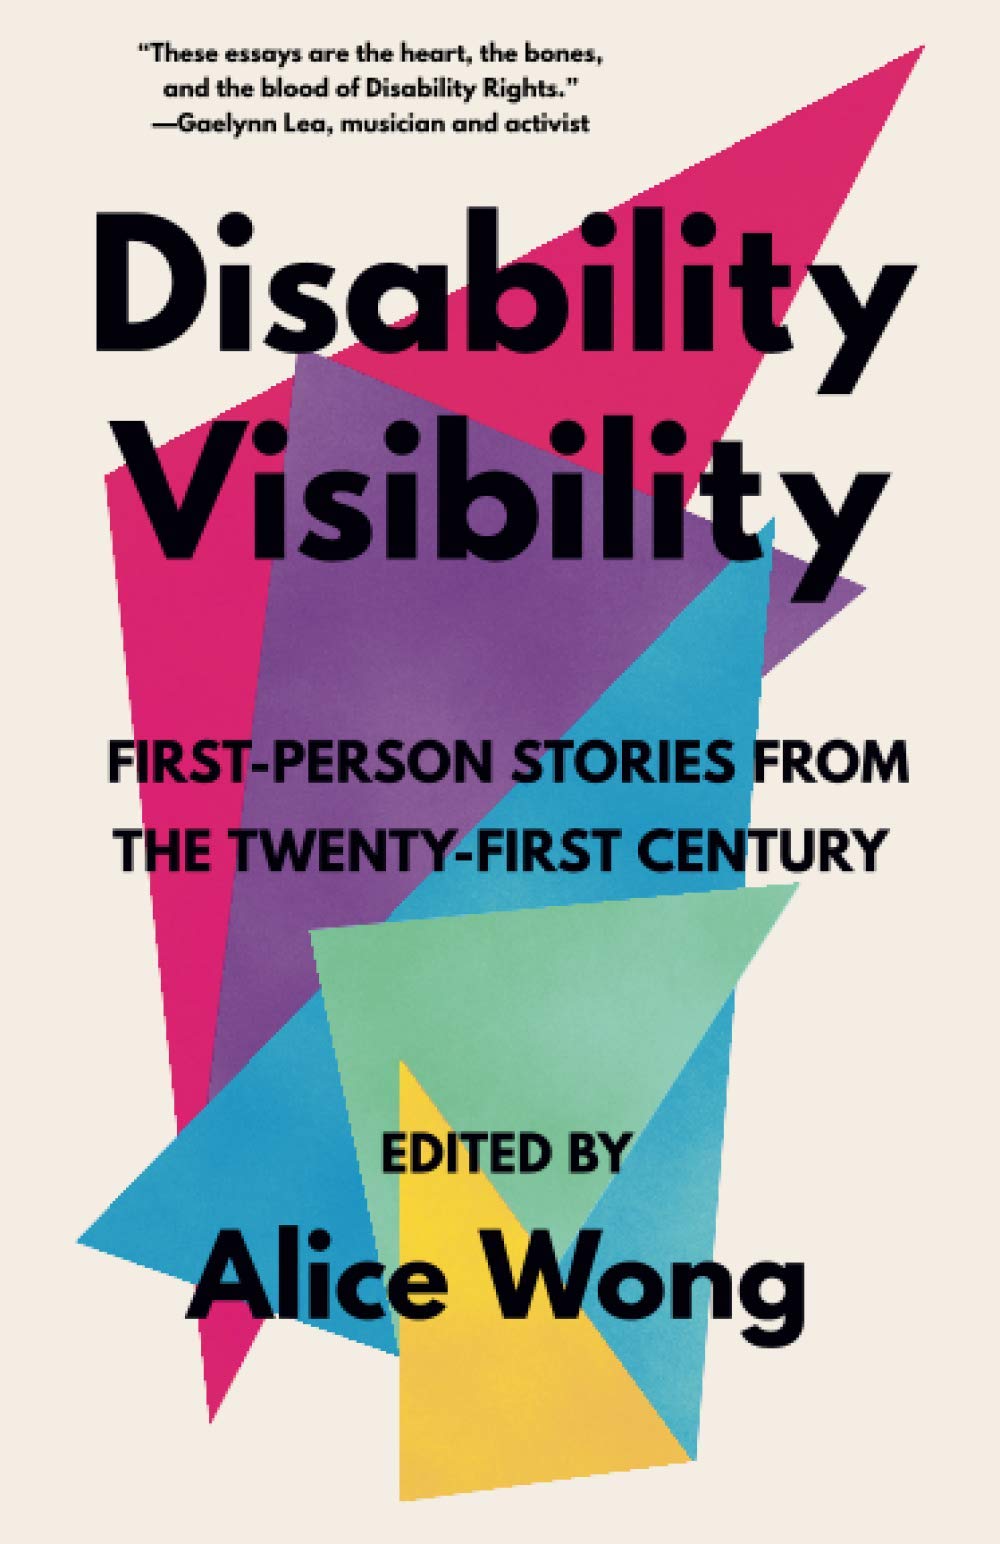 Disability Visibility: First-person stories from the 21st century